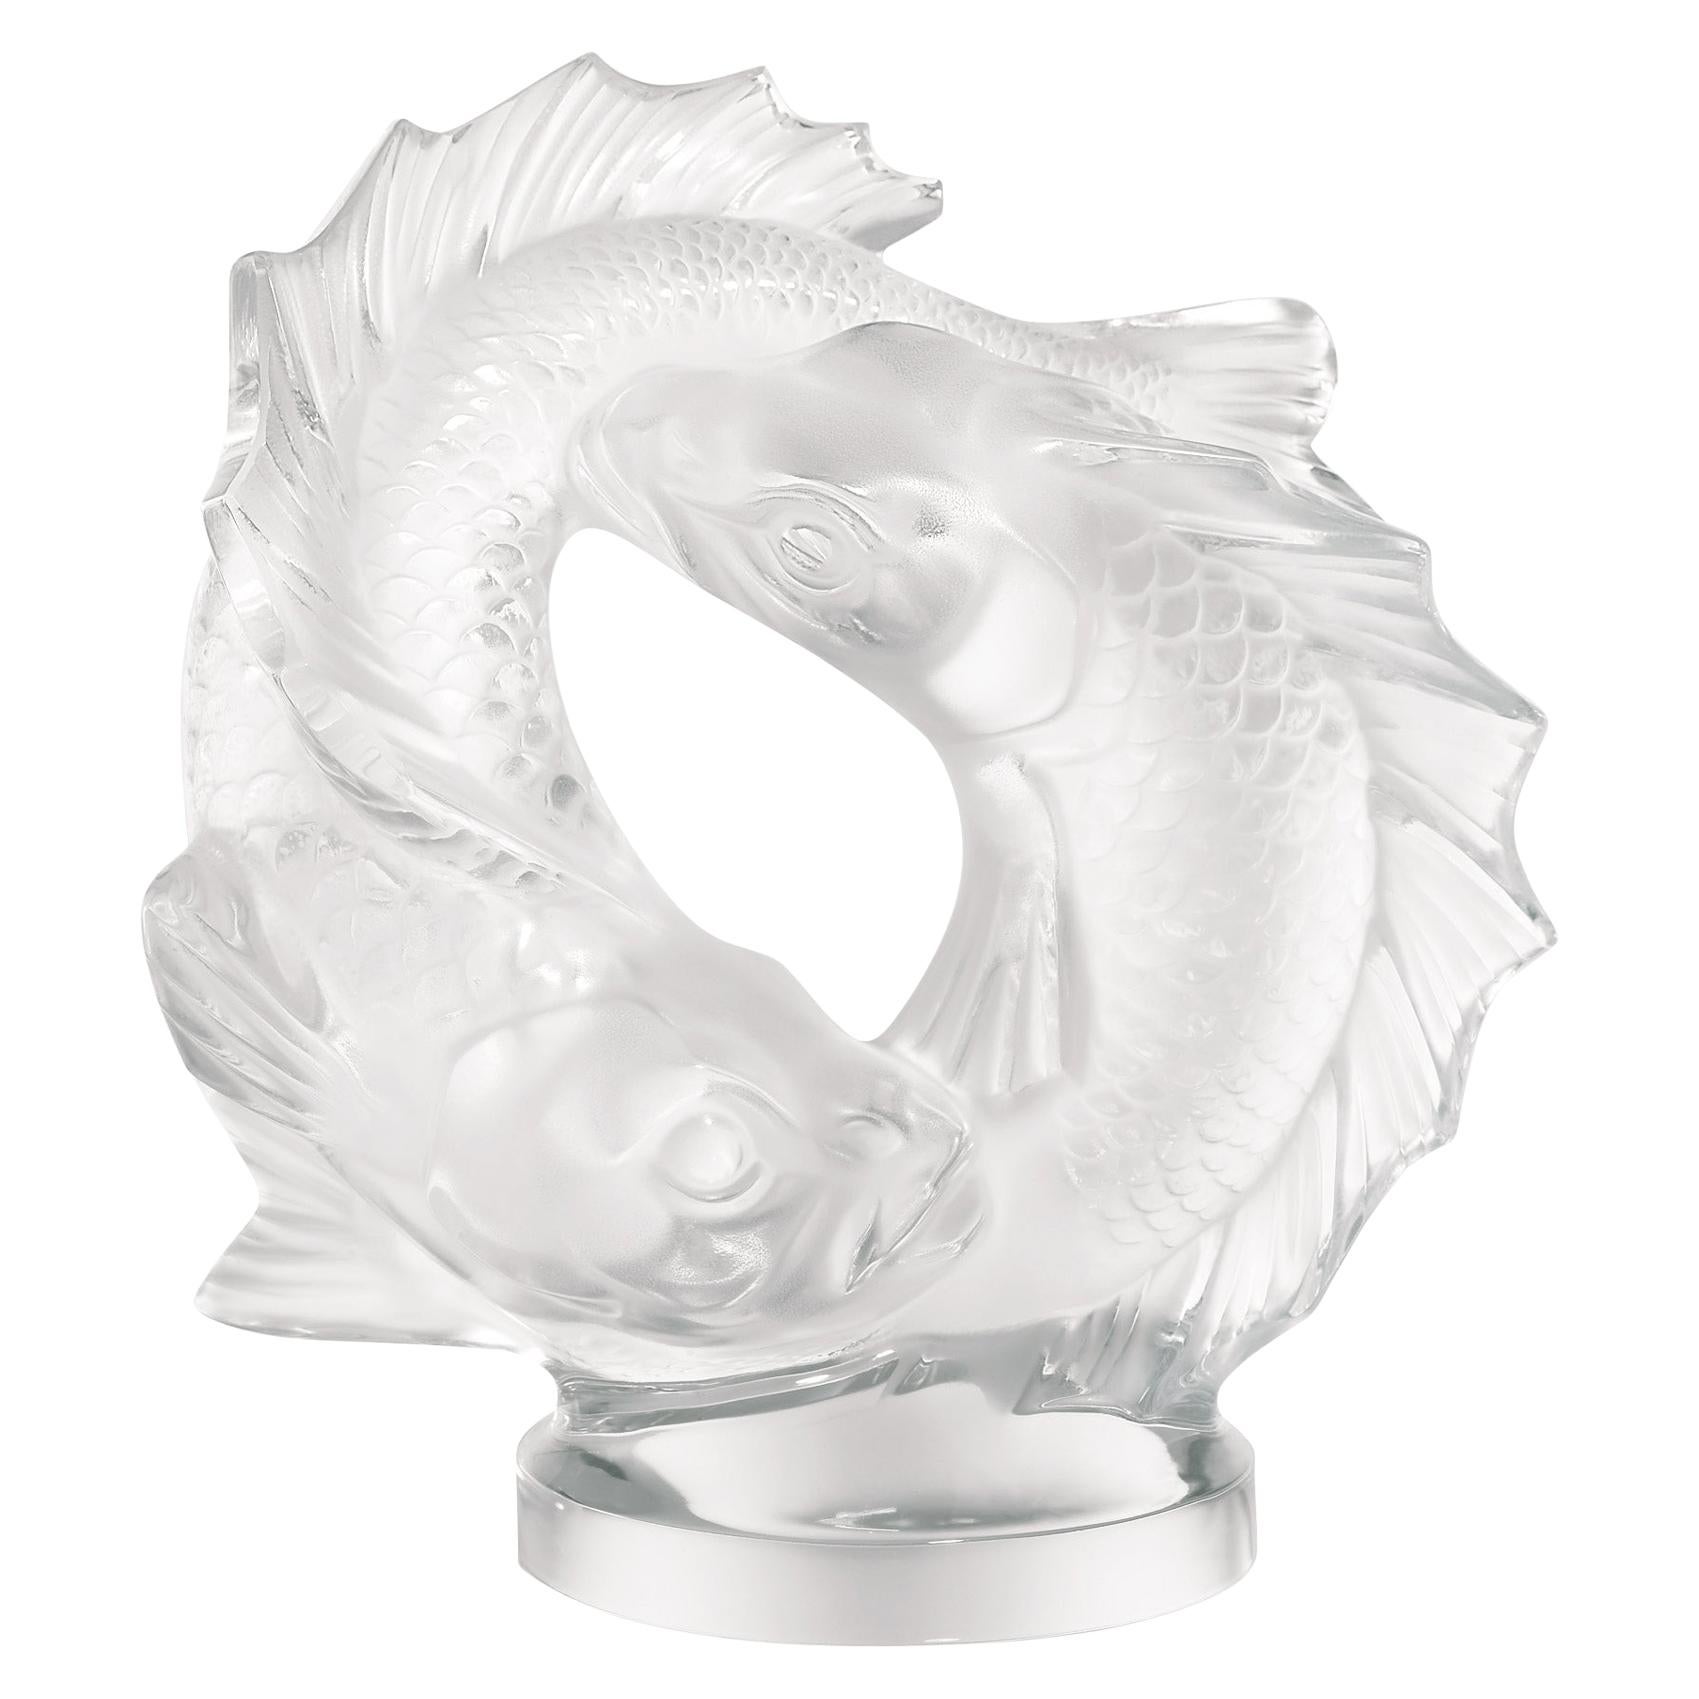 From the fish figurine created by René Lalique in 1913, to the car mascot ornament Perche, or the Roscoff bowl, the fish has often inspired Lalique creations. On this large satin crystal figure, designed in 1953 by Marc Lalique, two fish appear to